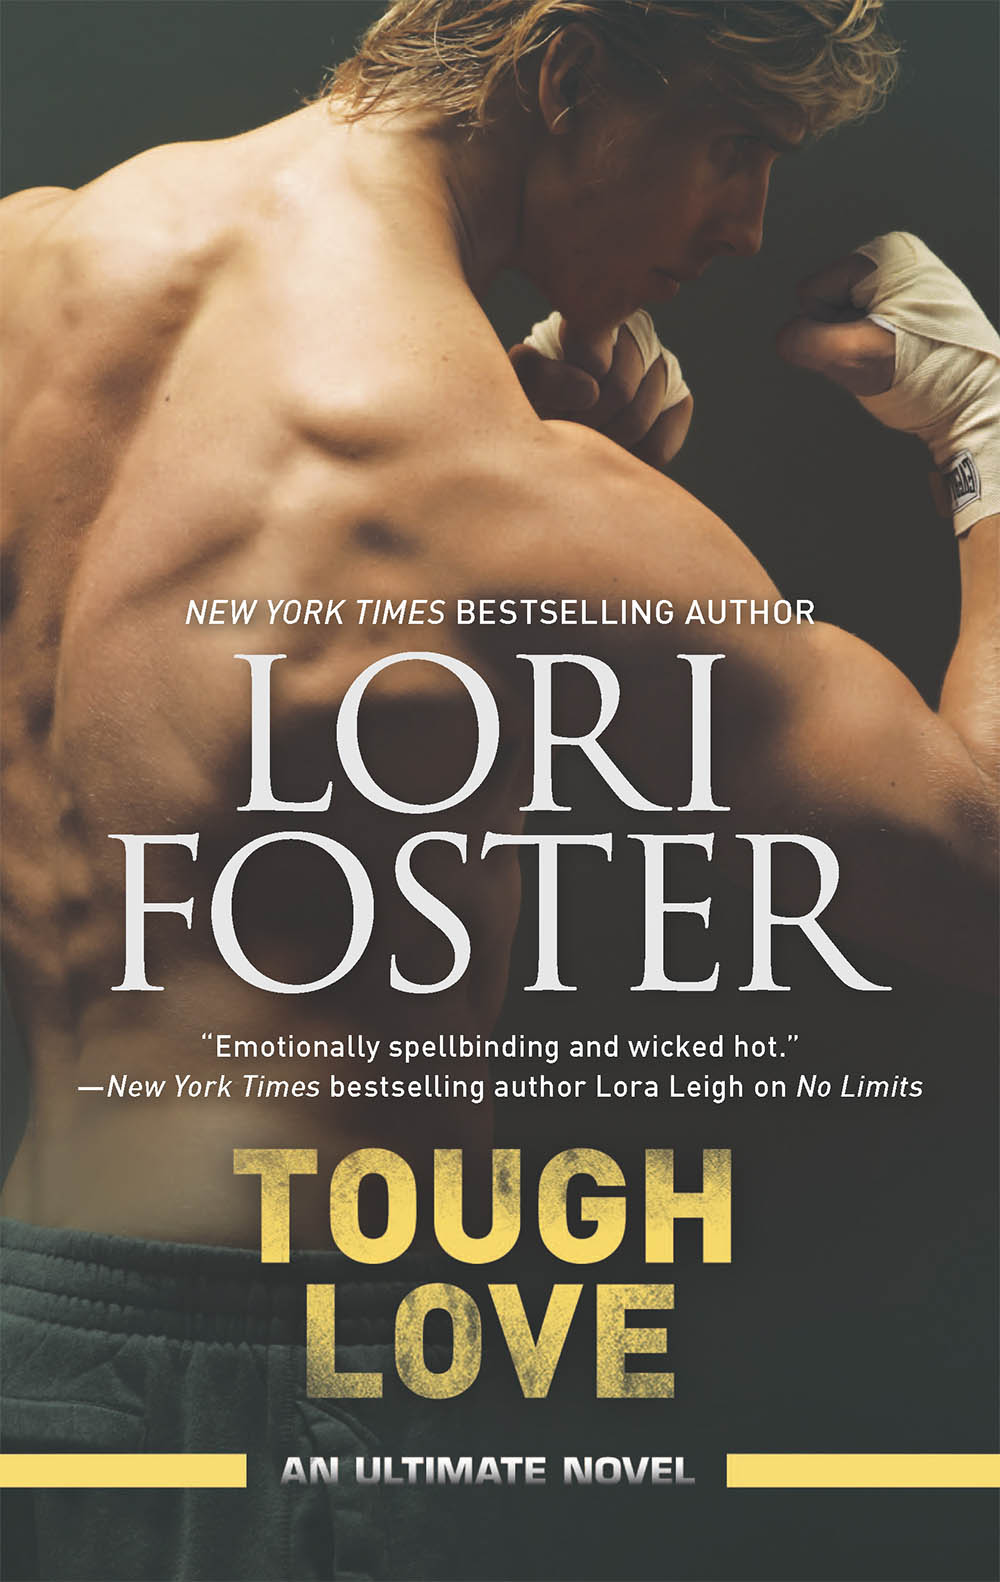 Book-2_Tough-Love-by-Lori-Foster_cover_low